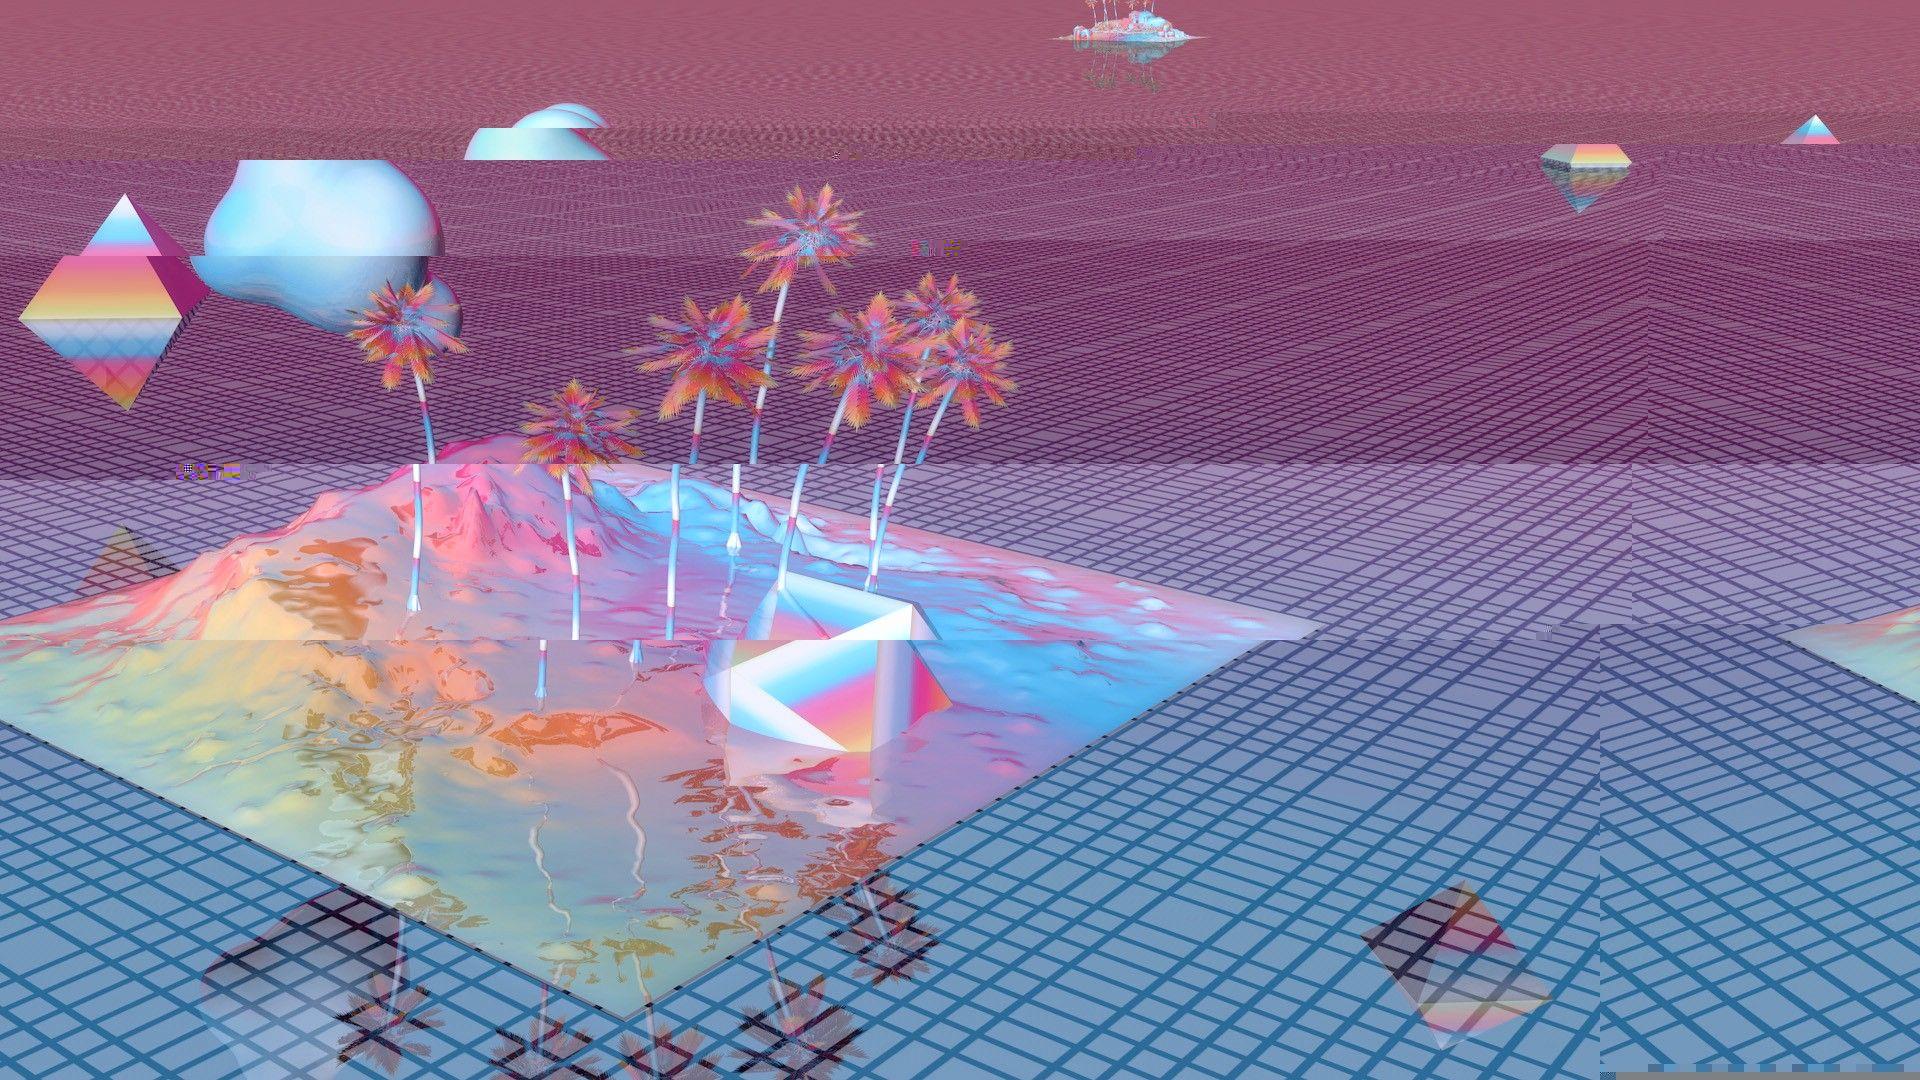 Vaporwave Aesthetic Wallpapers Hd Desktop And Mobile Backgrounds Images